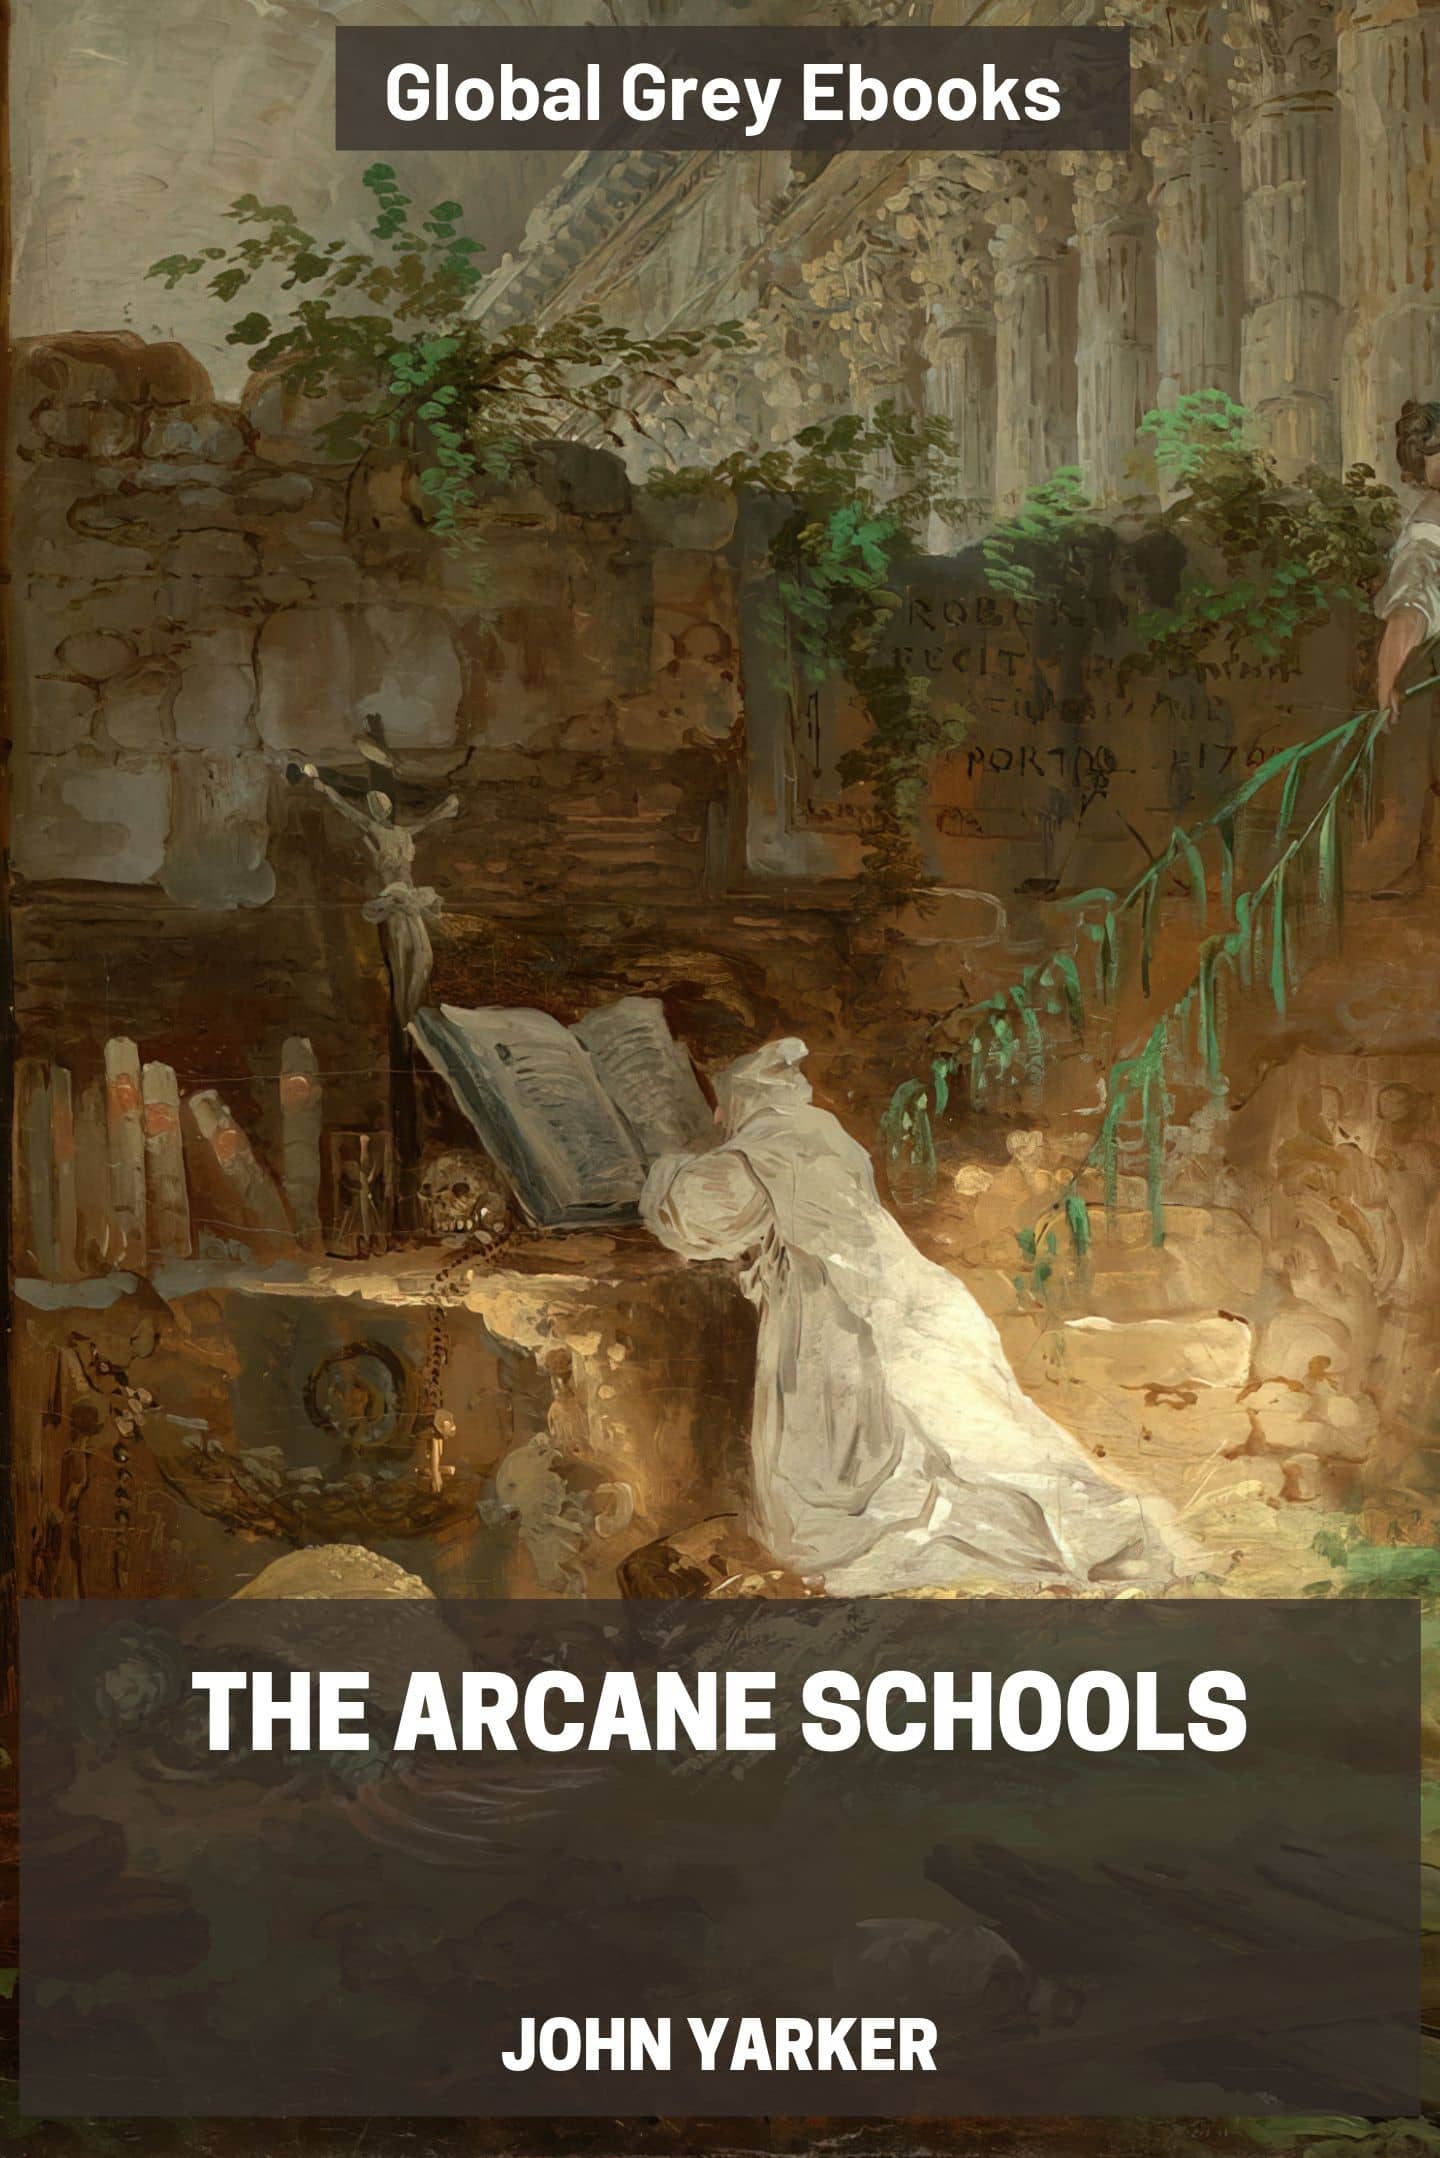 The Arcane Schools by John Yarker - Complete text online image